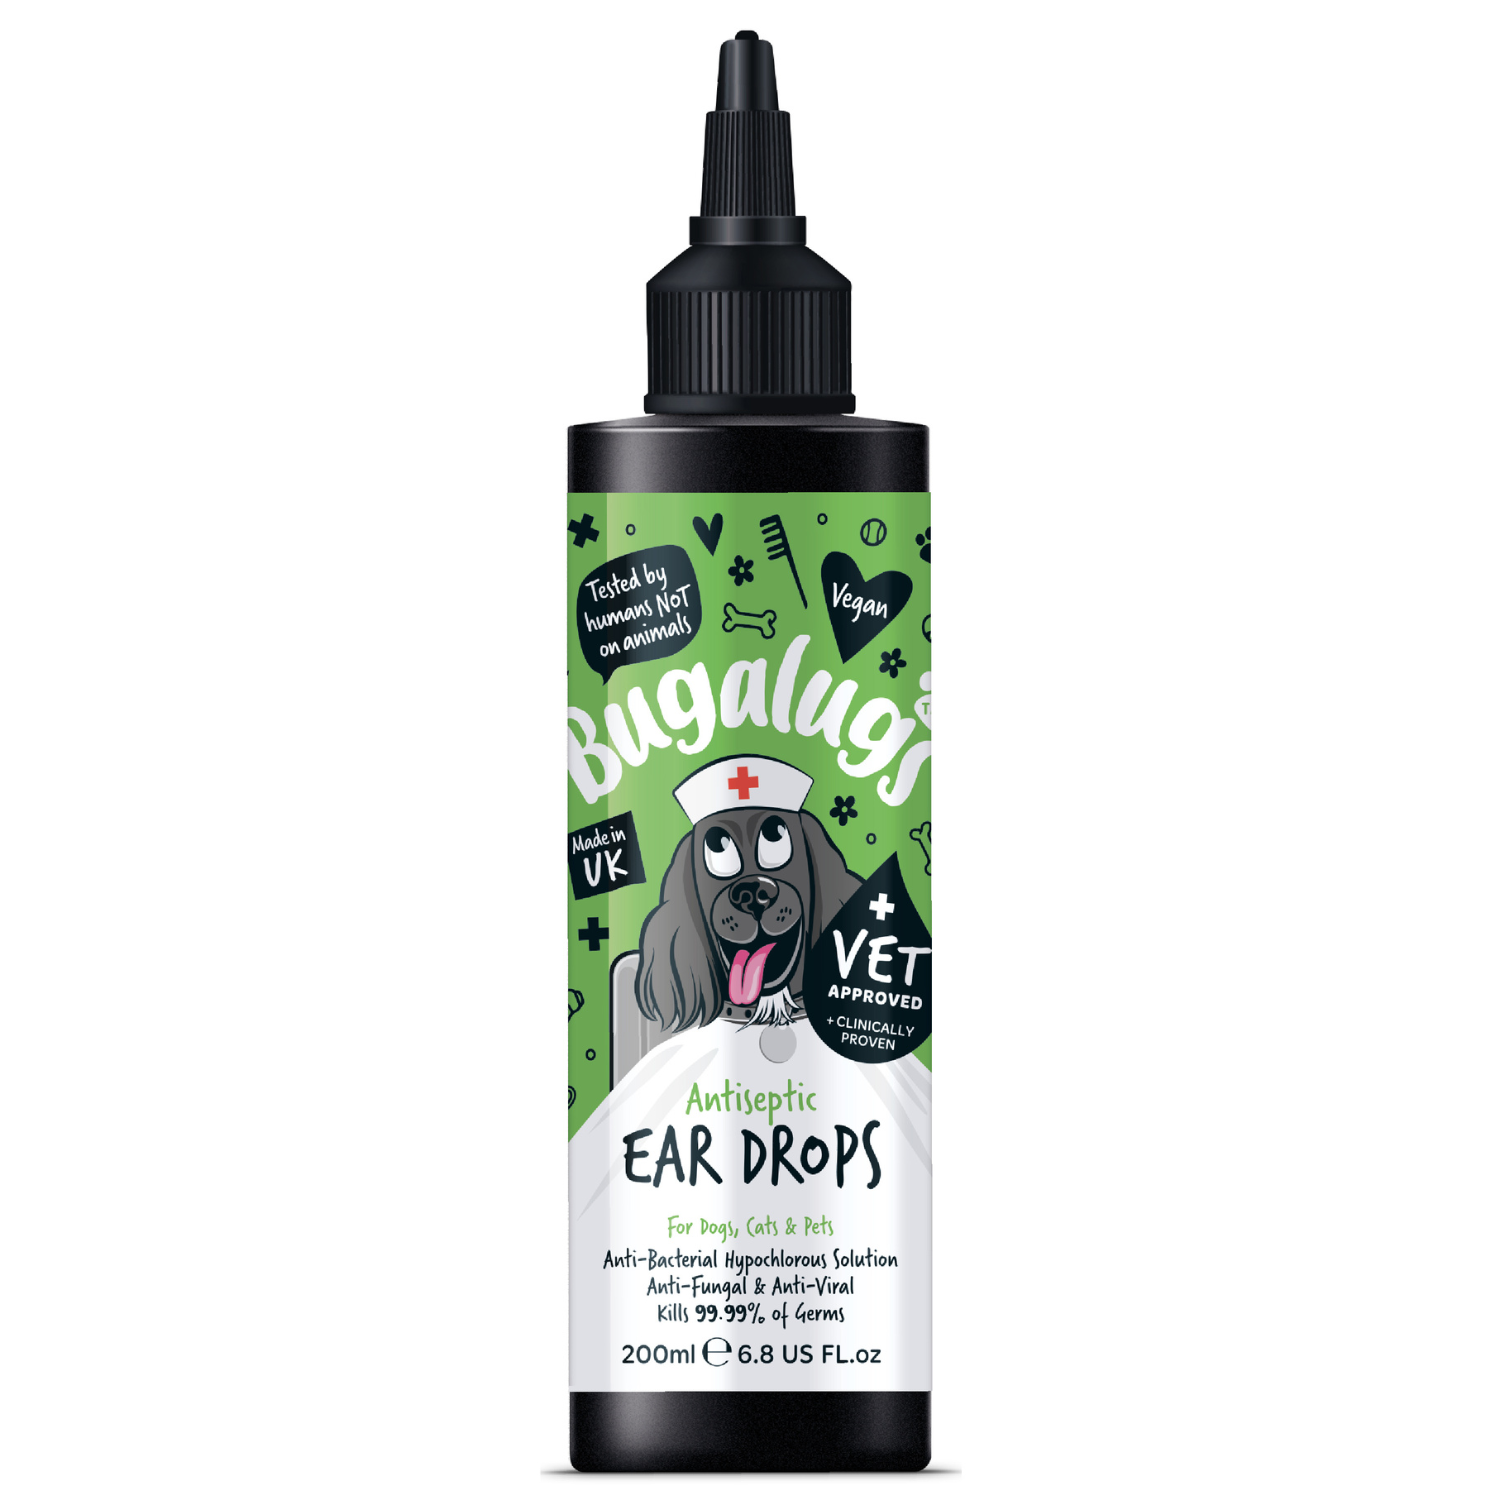 Bugalugs Antiseptic Ear Drops for Dogs, Cats and Pets